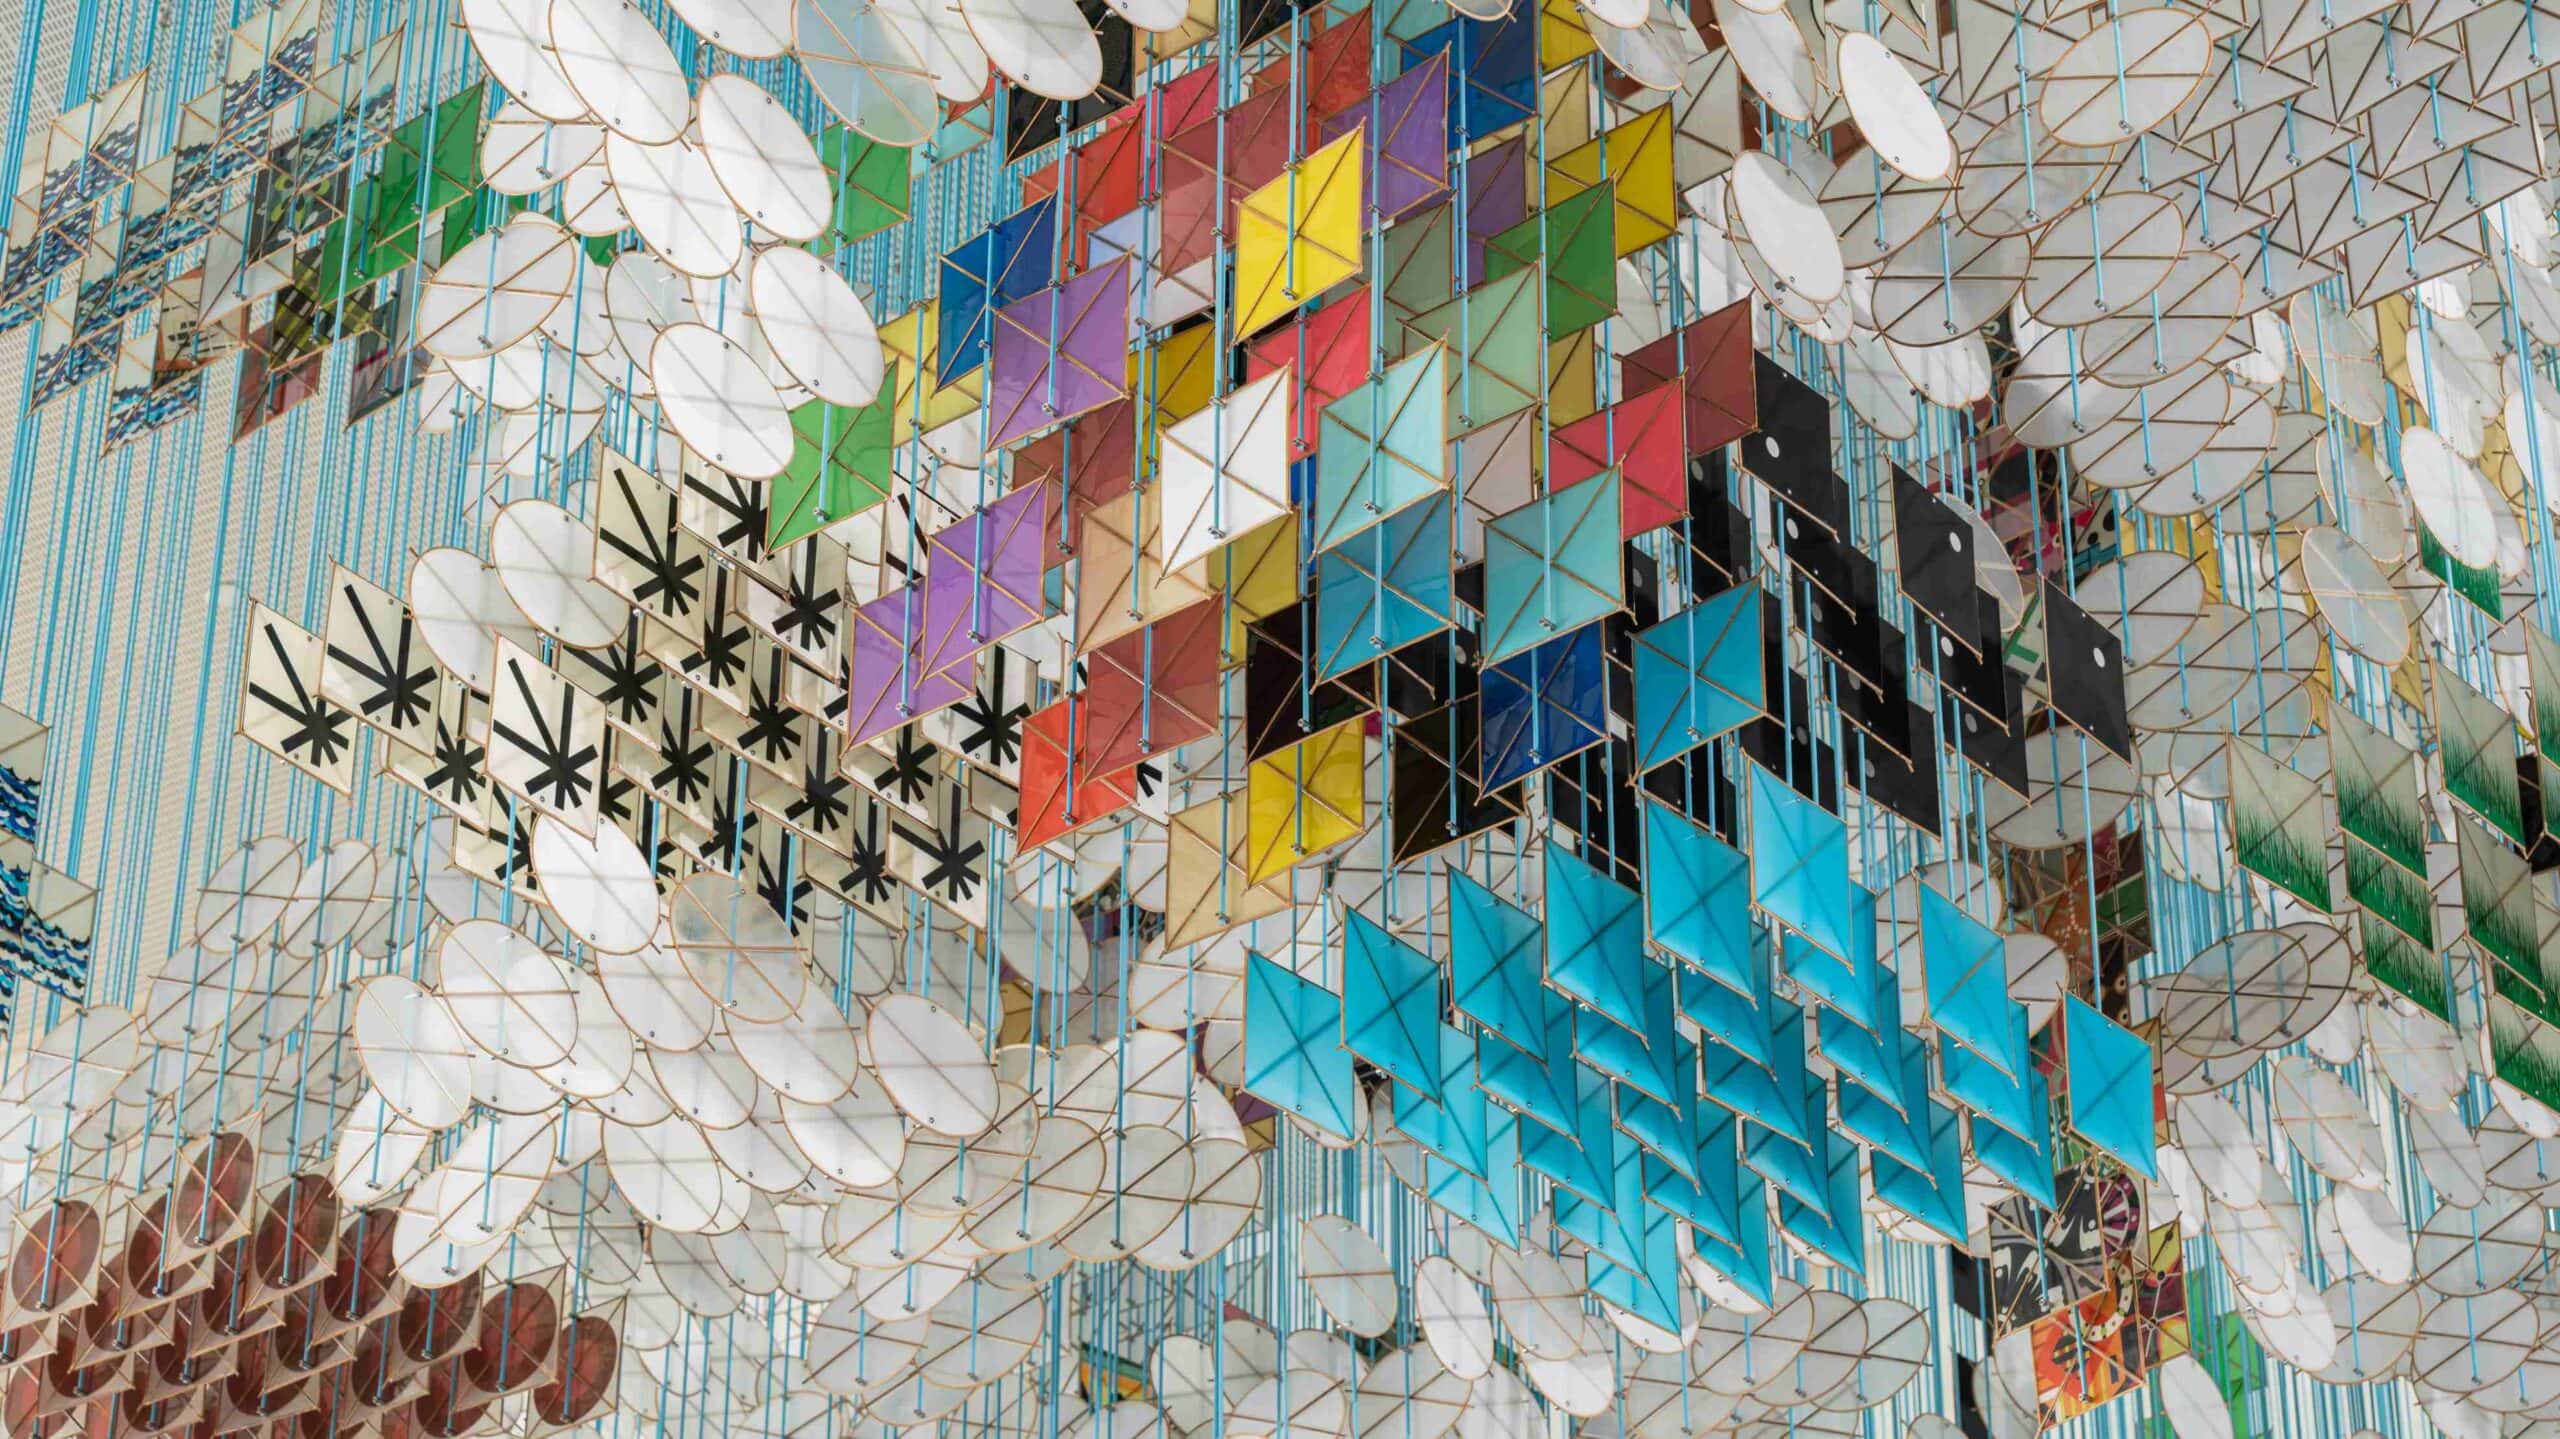 Colorful paper kites hang on a ceiling